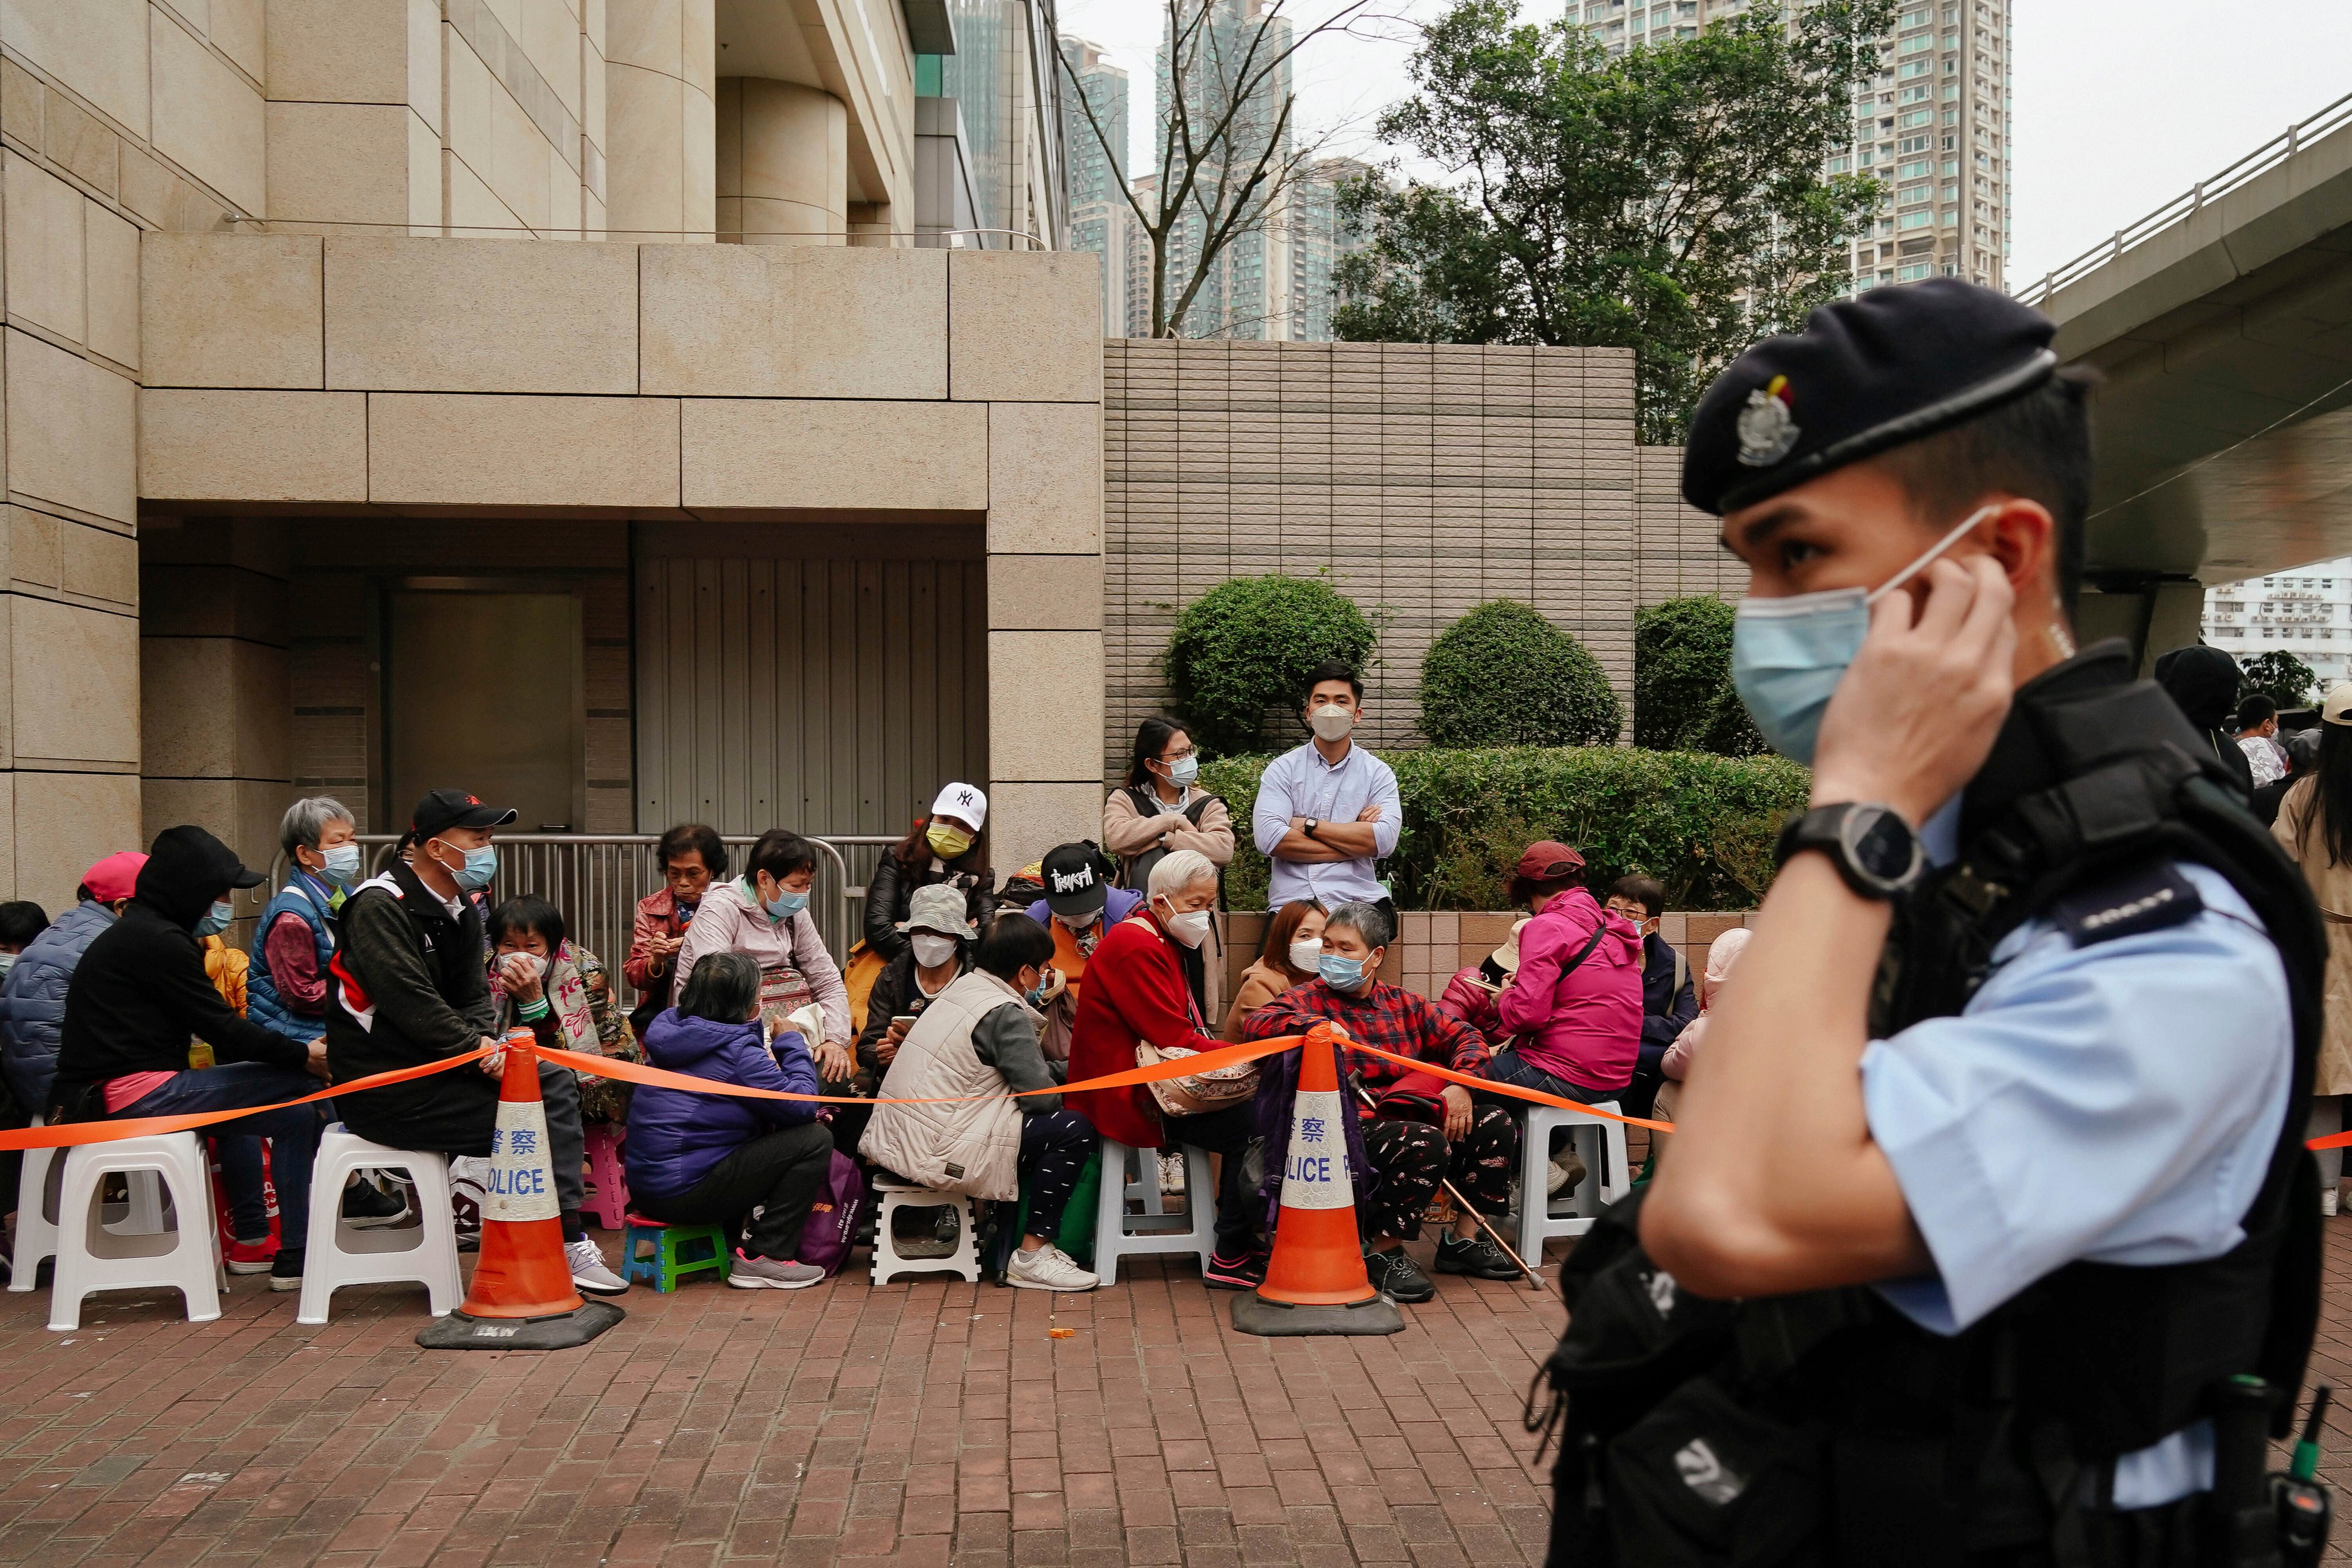 A police officer stands watch as people wait outside the West Kowloon Magistrates’ Courts ahead of the national security trial of pro-democracy activists in Hong Kong on February 6, in the biggest prosecution yet under the law introduced in 2020. Photo: AP